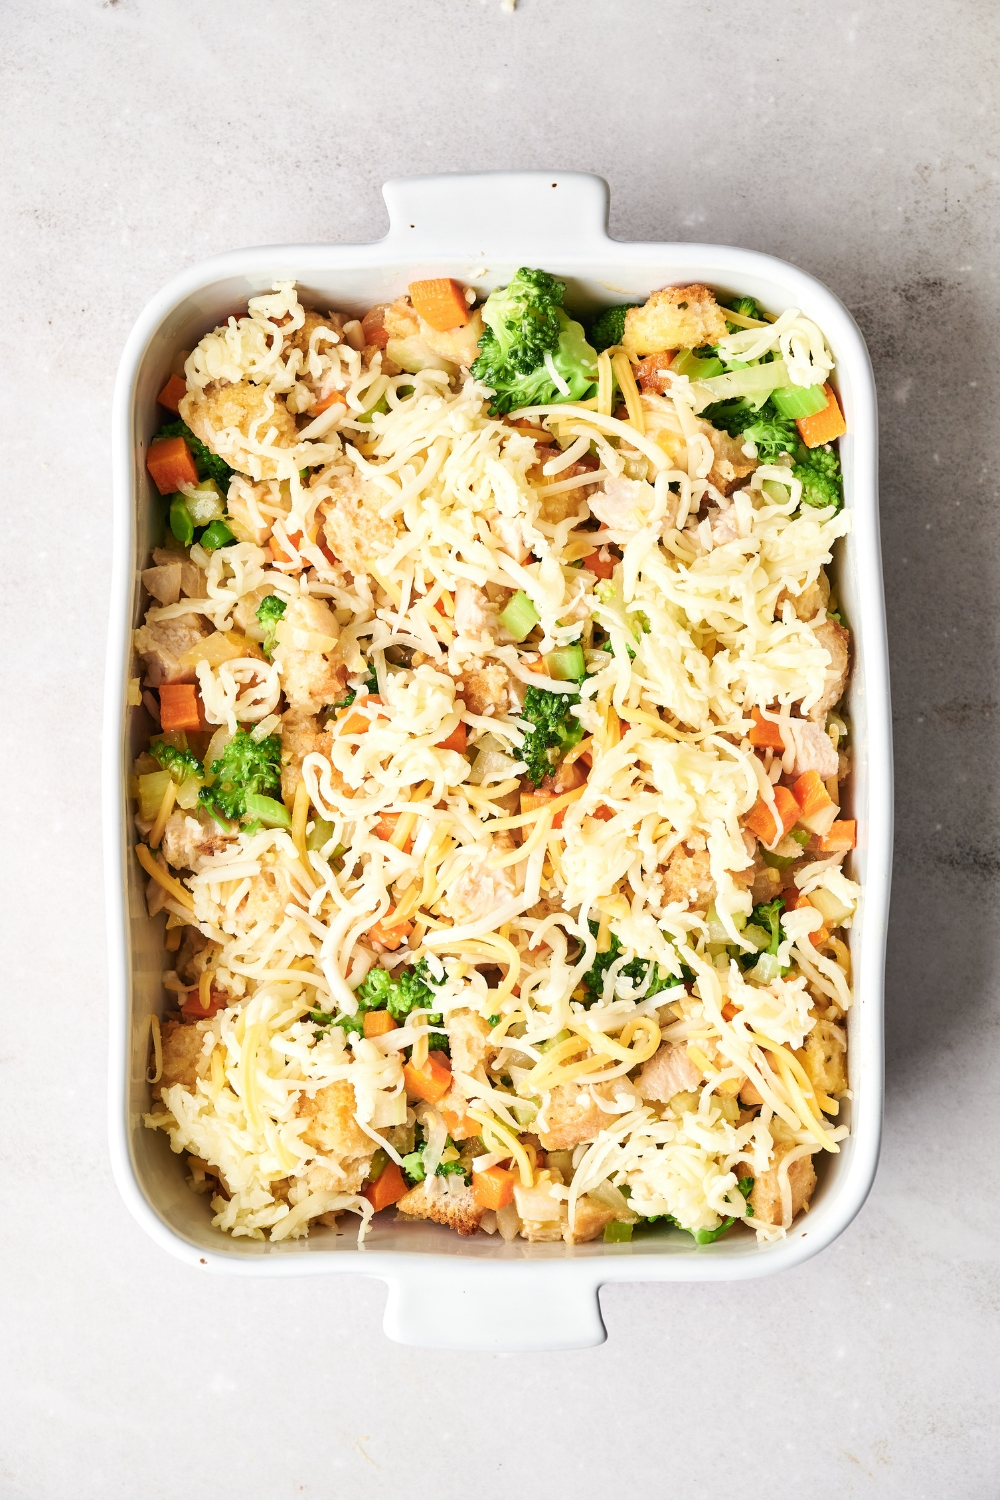 A casserole dish of chicken broccoli stuffing with shredded cheese on top.